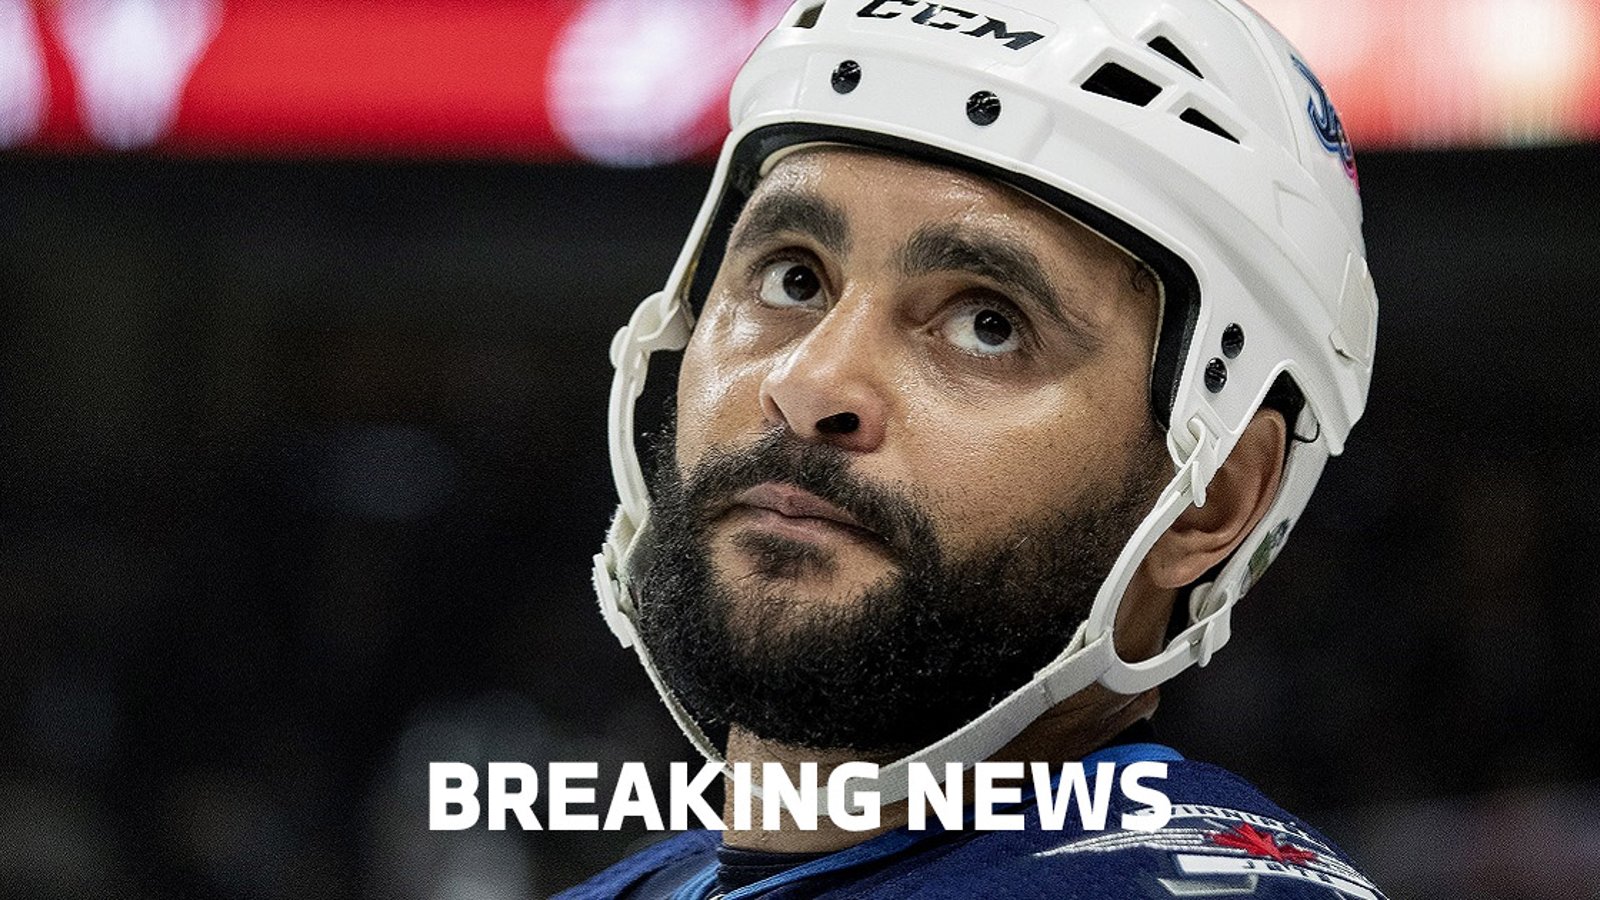 NHL insider drops a bombshell update on the Dustin Byfuglien situation.